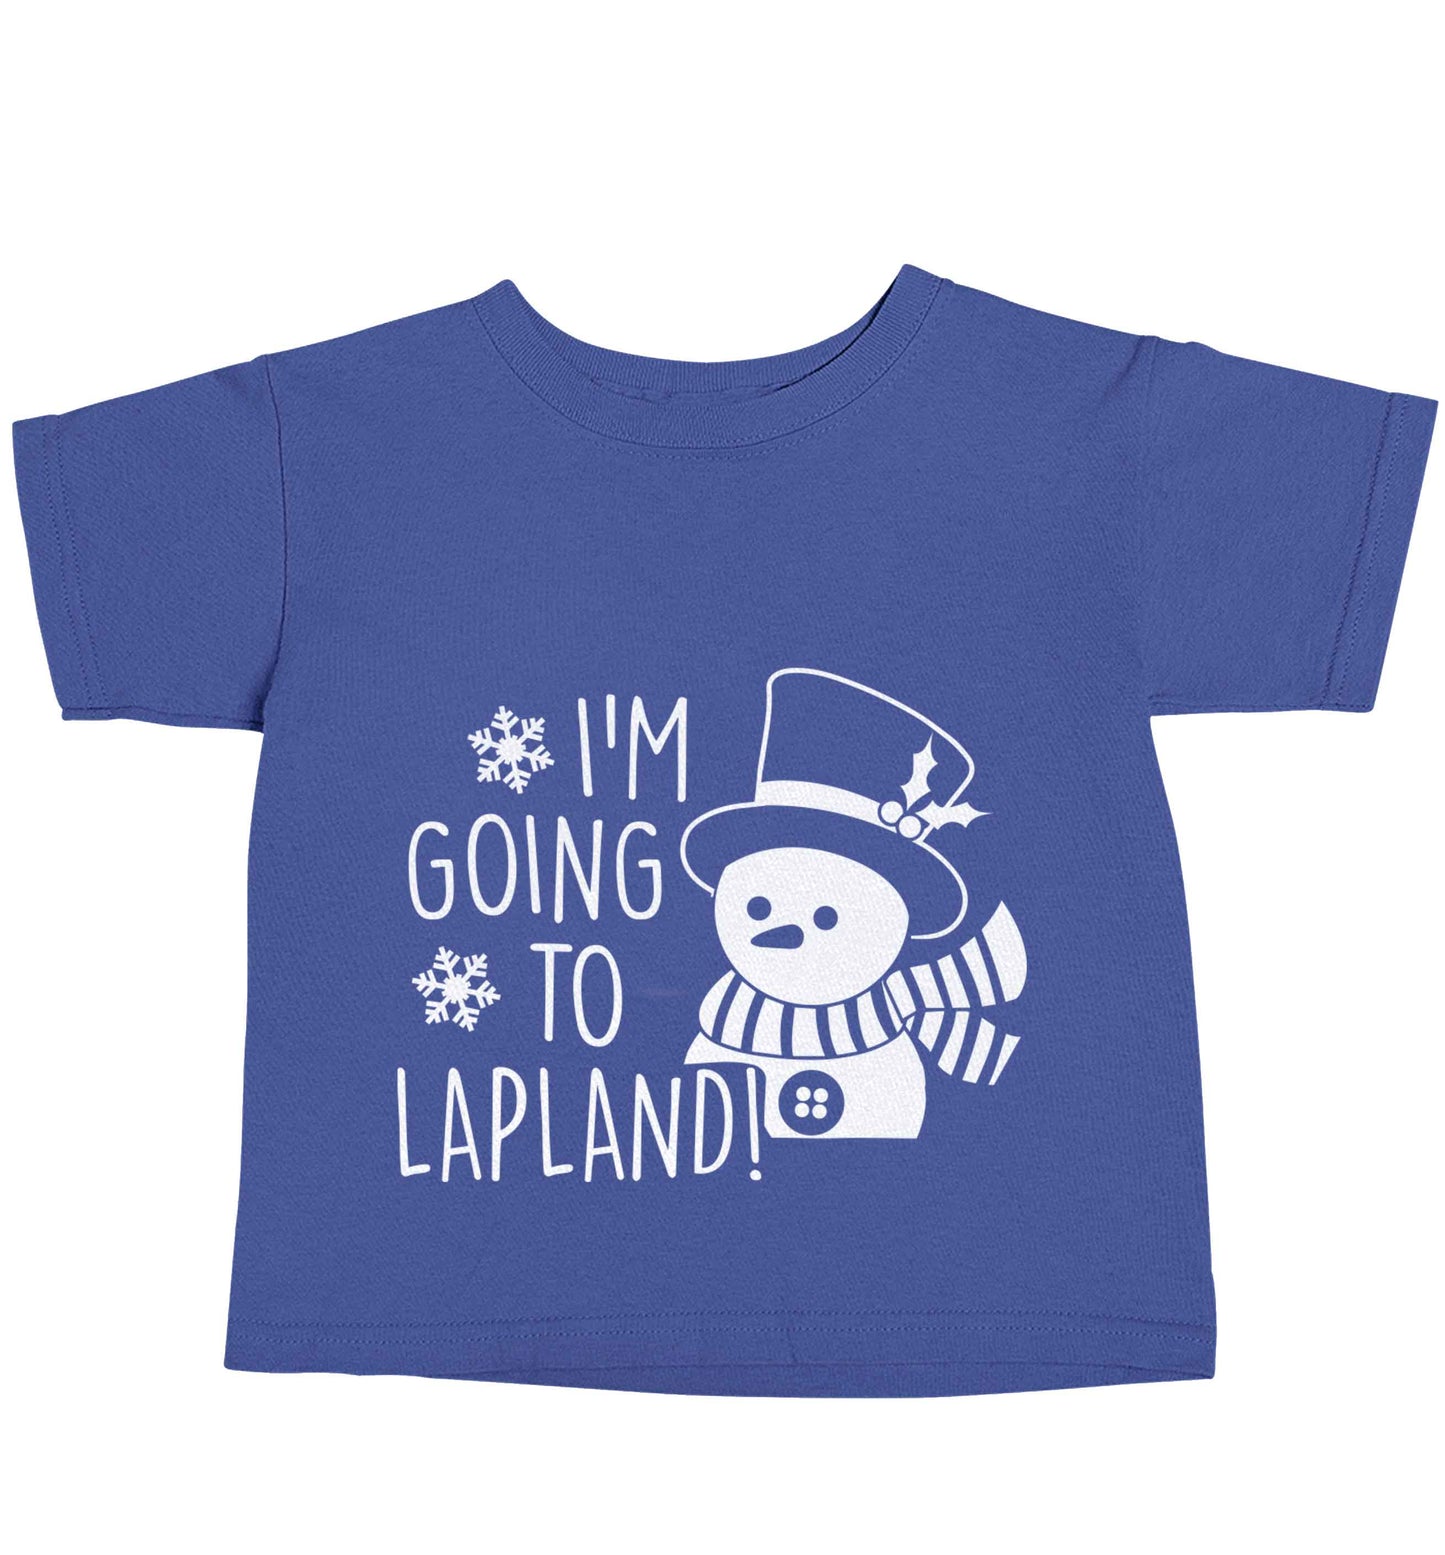 I'm going to Lapland blue baby toddler Tshirt 2 Years